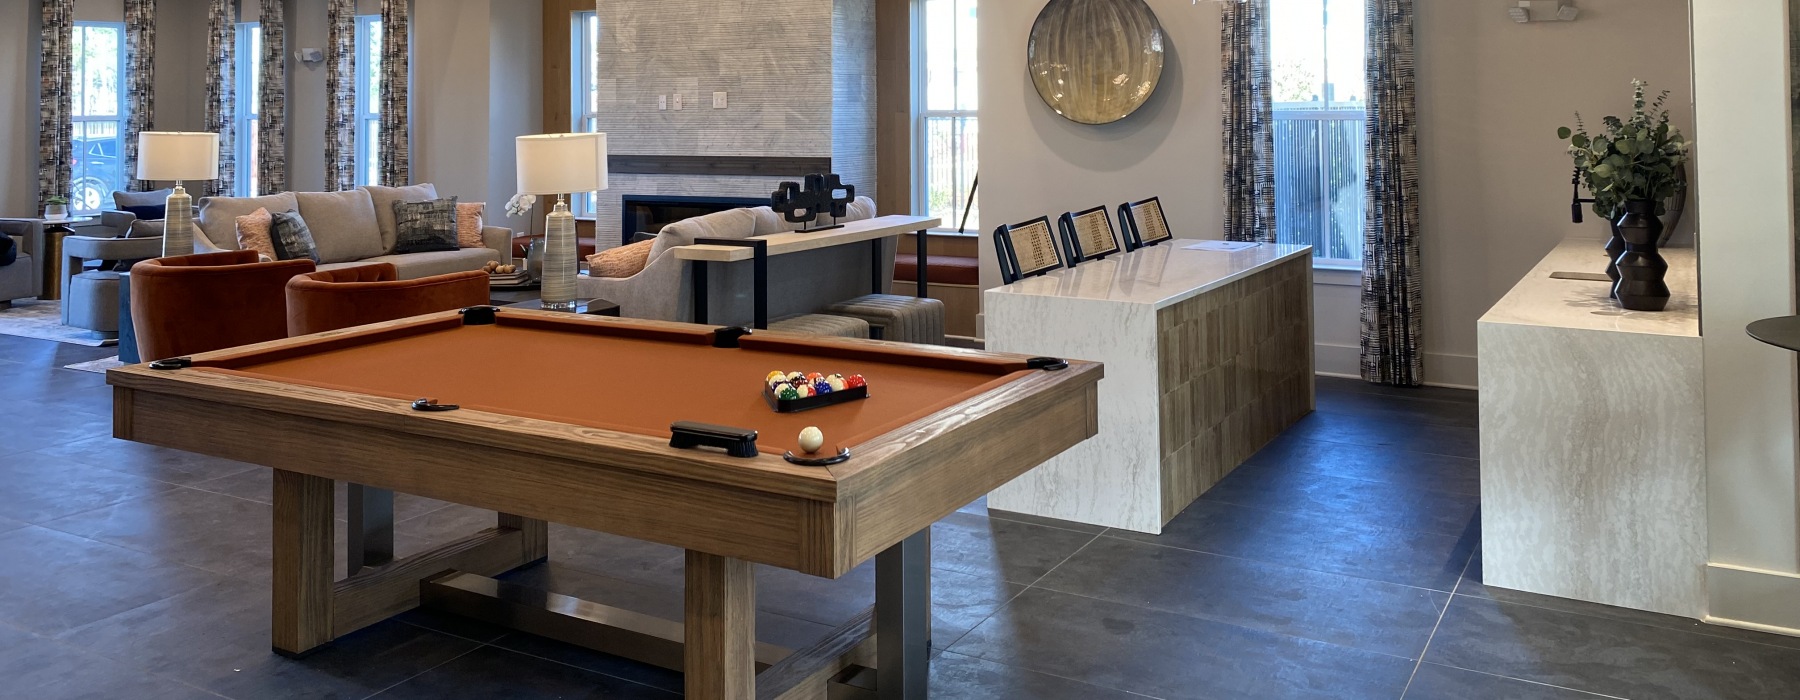 Resident gathering spaces with fireplace and pool table at Riverchase Vista Savannah apartments.